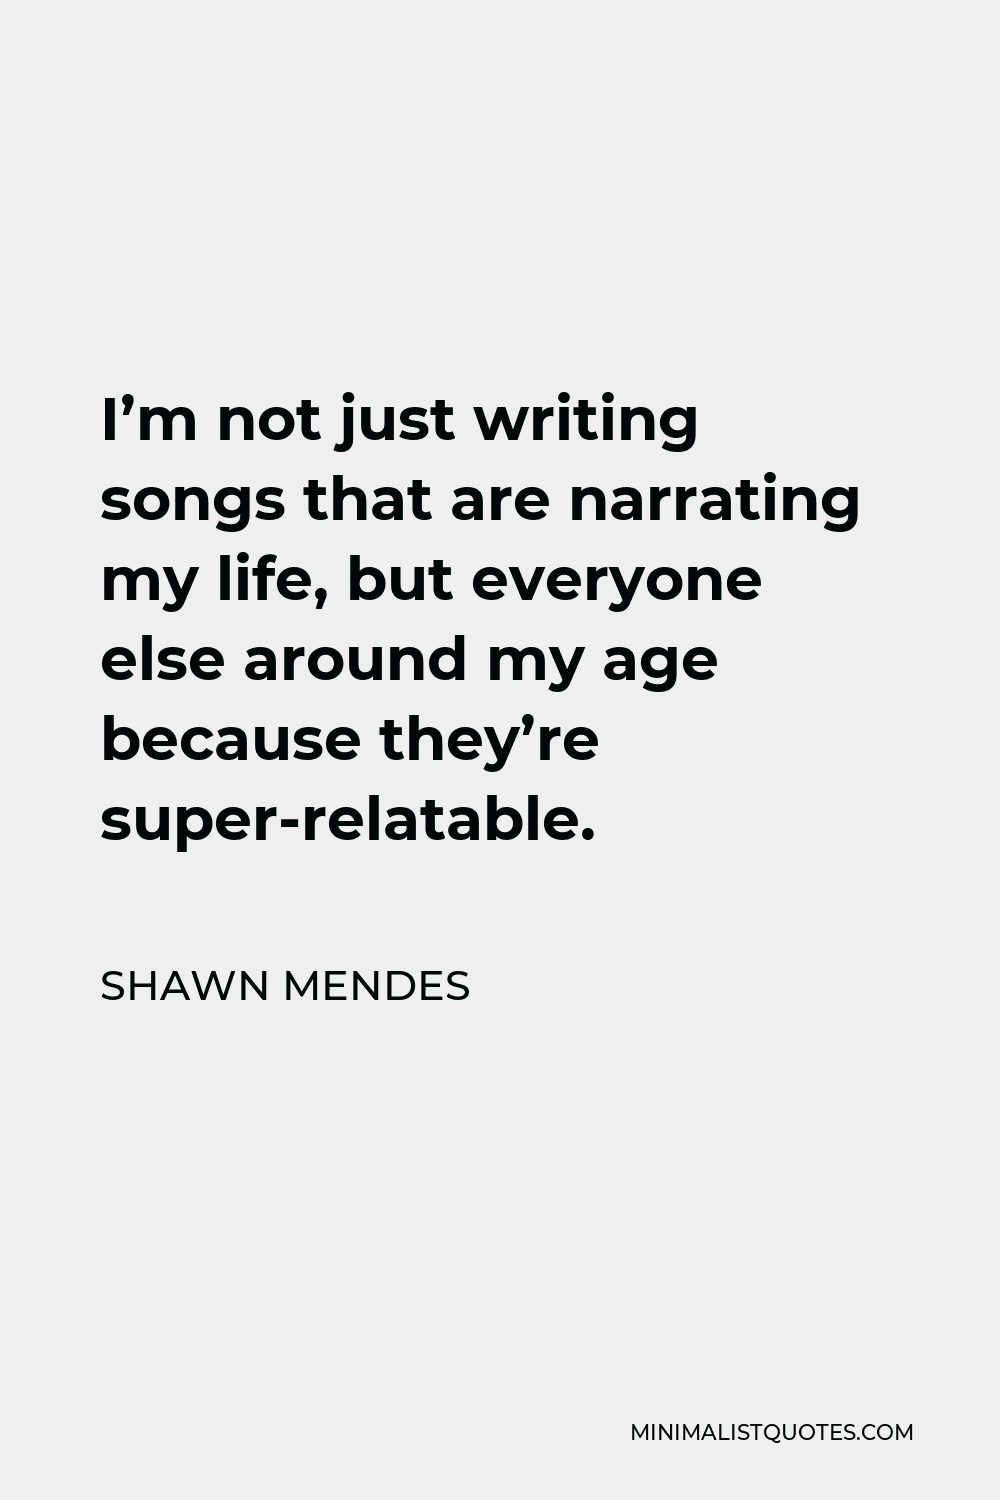 Shawn Mendes Quote - I’m not just writing songs that are narrating my life, but everyone else around my age because they’re super-relatable.